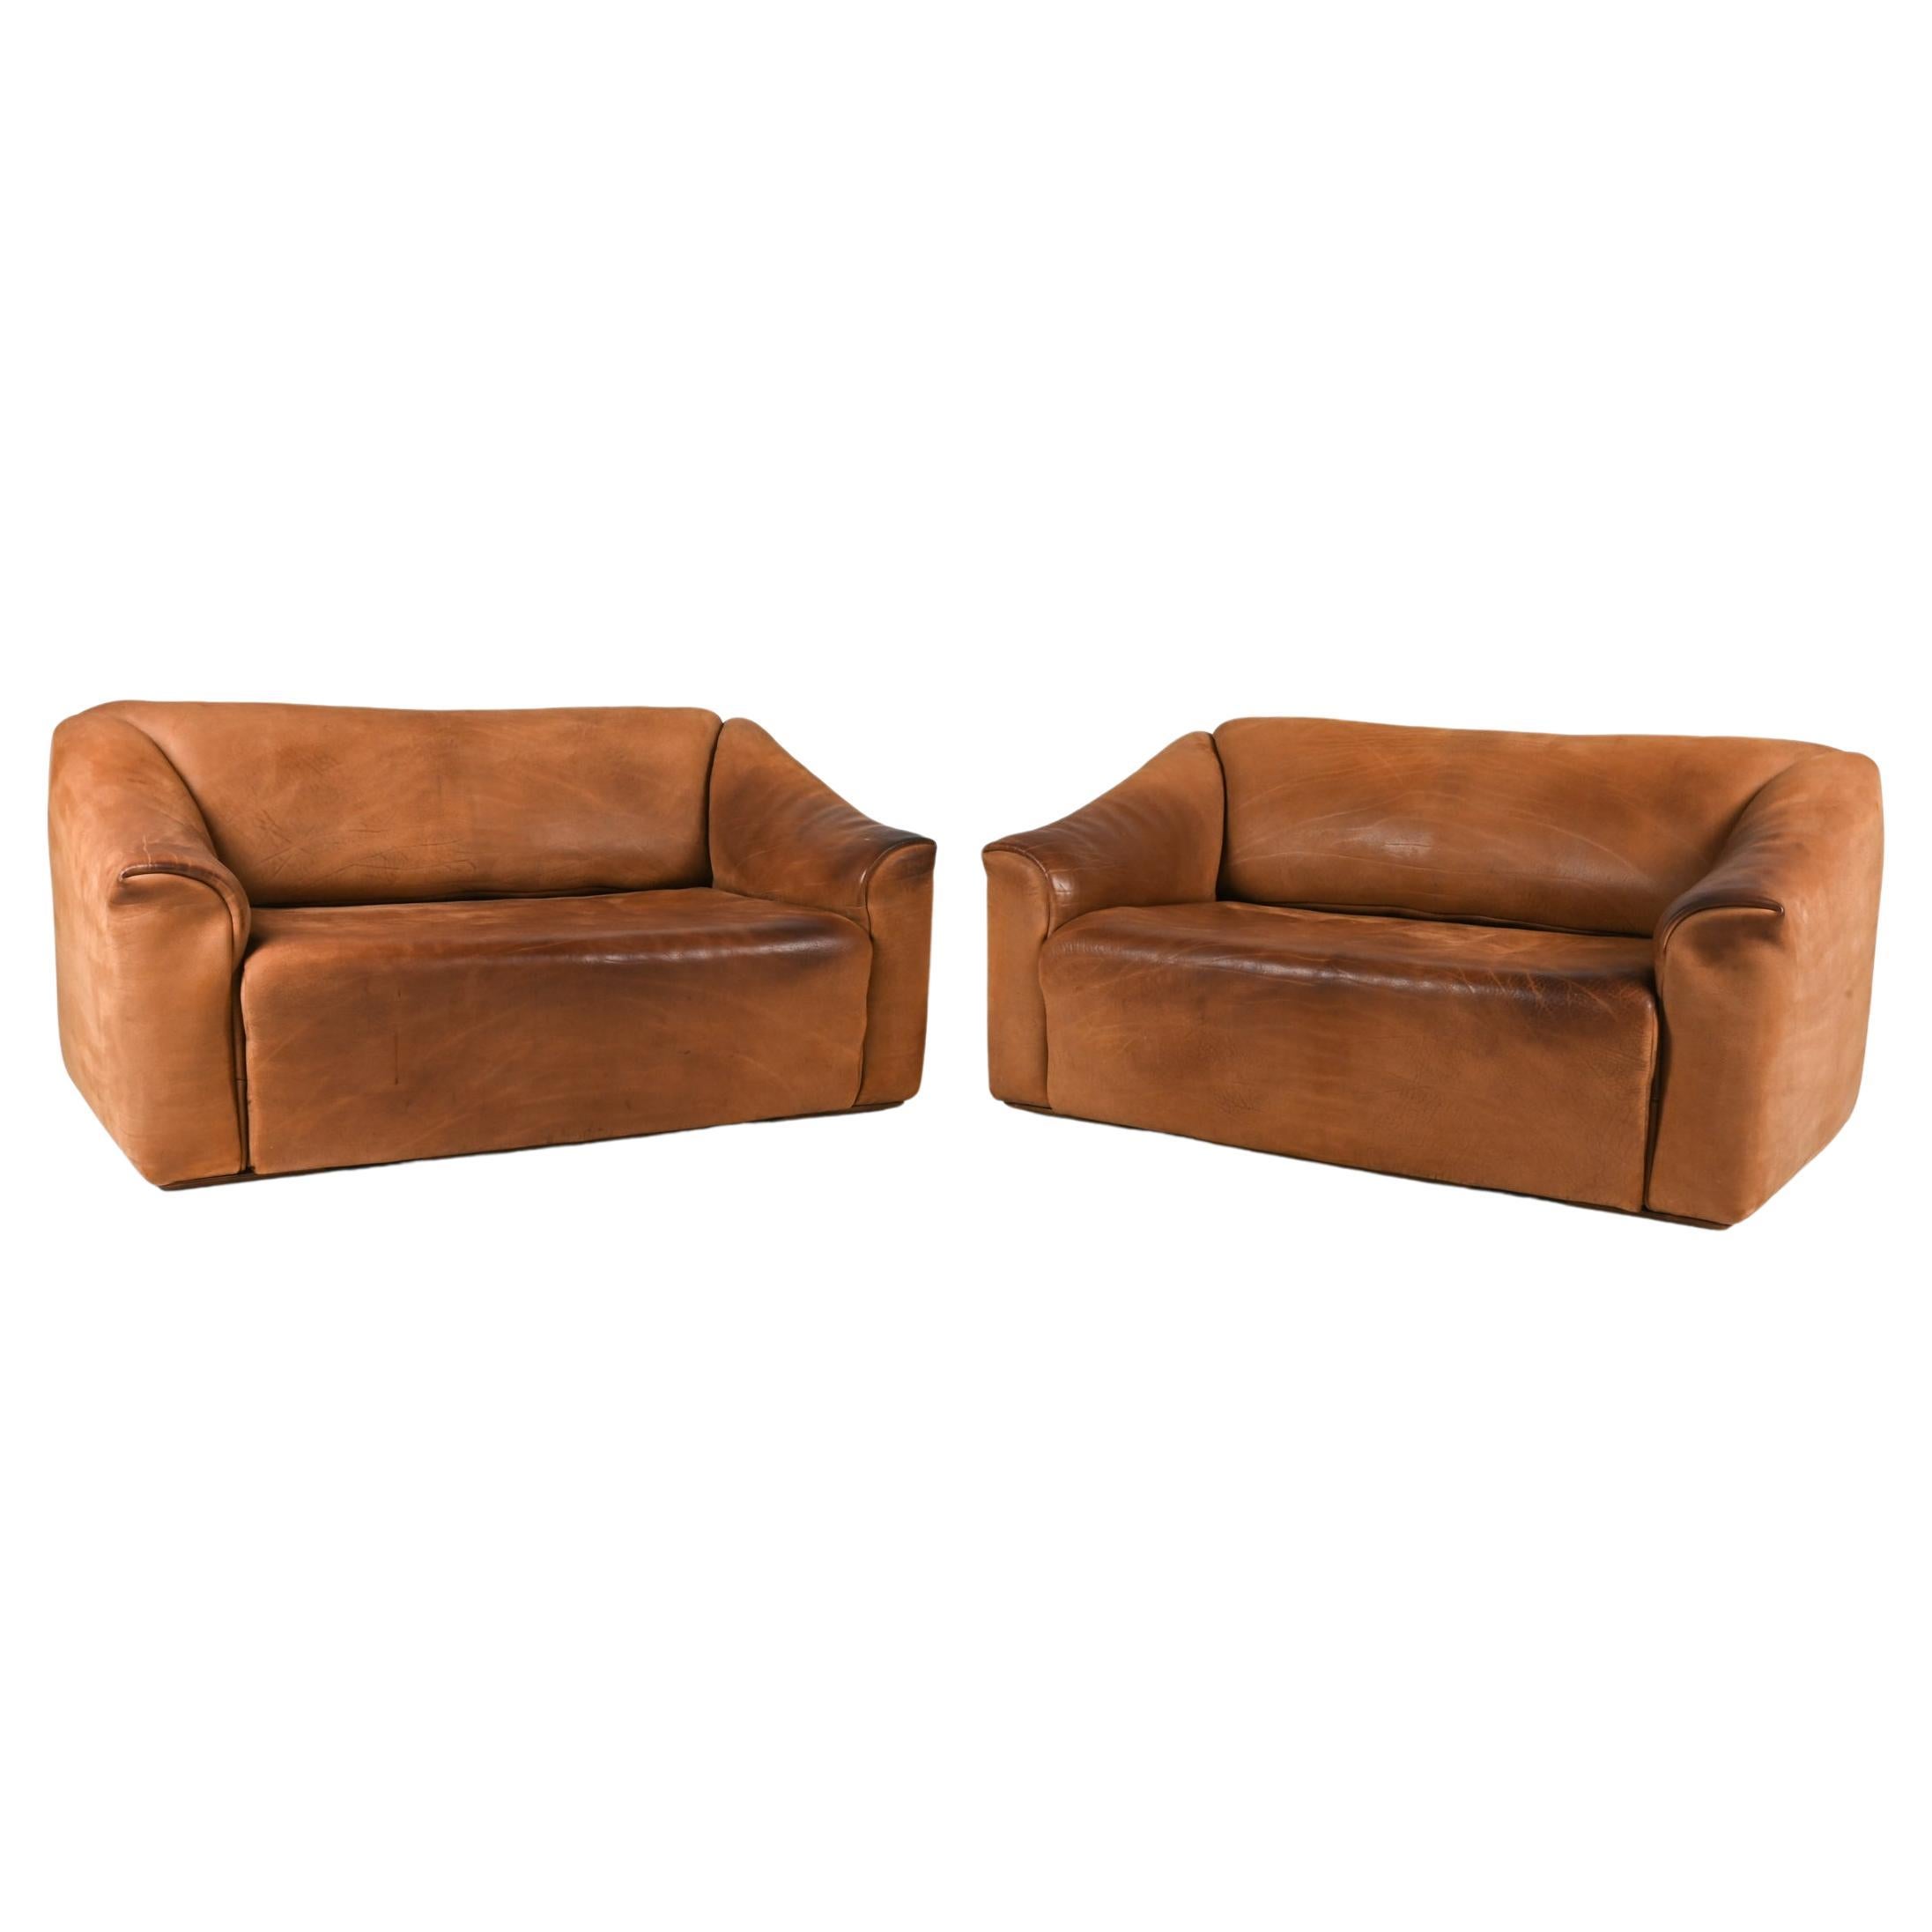 Pair of De Sede DS-47 Two-Seat Sofas in Nubuck Leather, c. 1970's